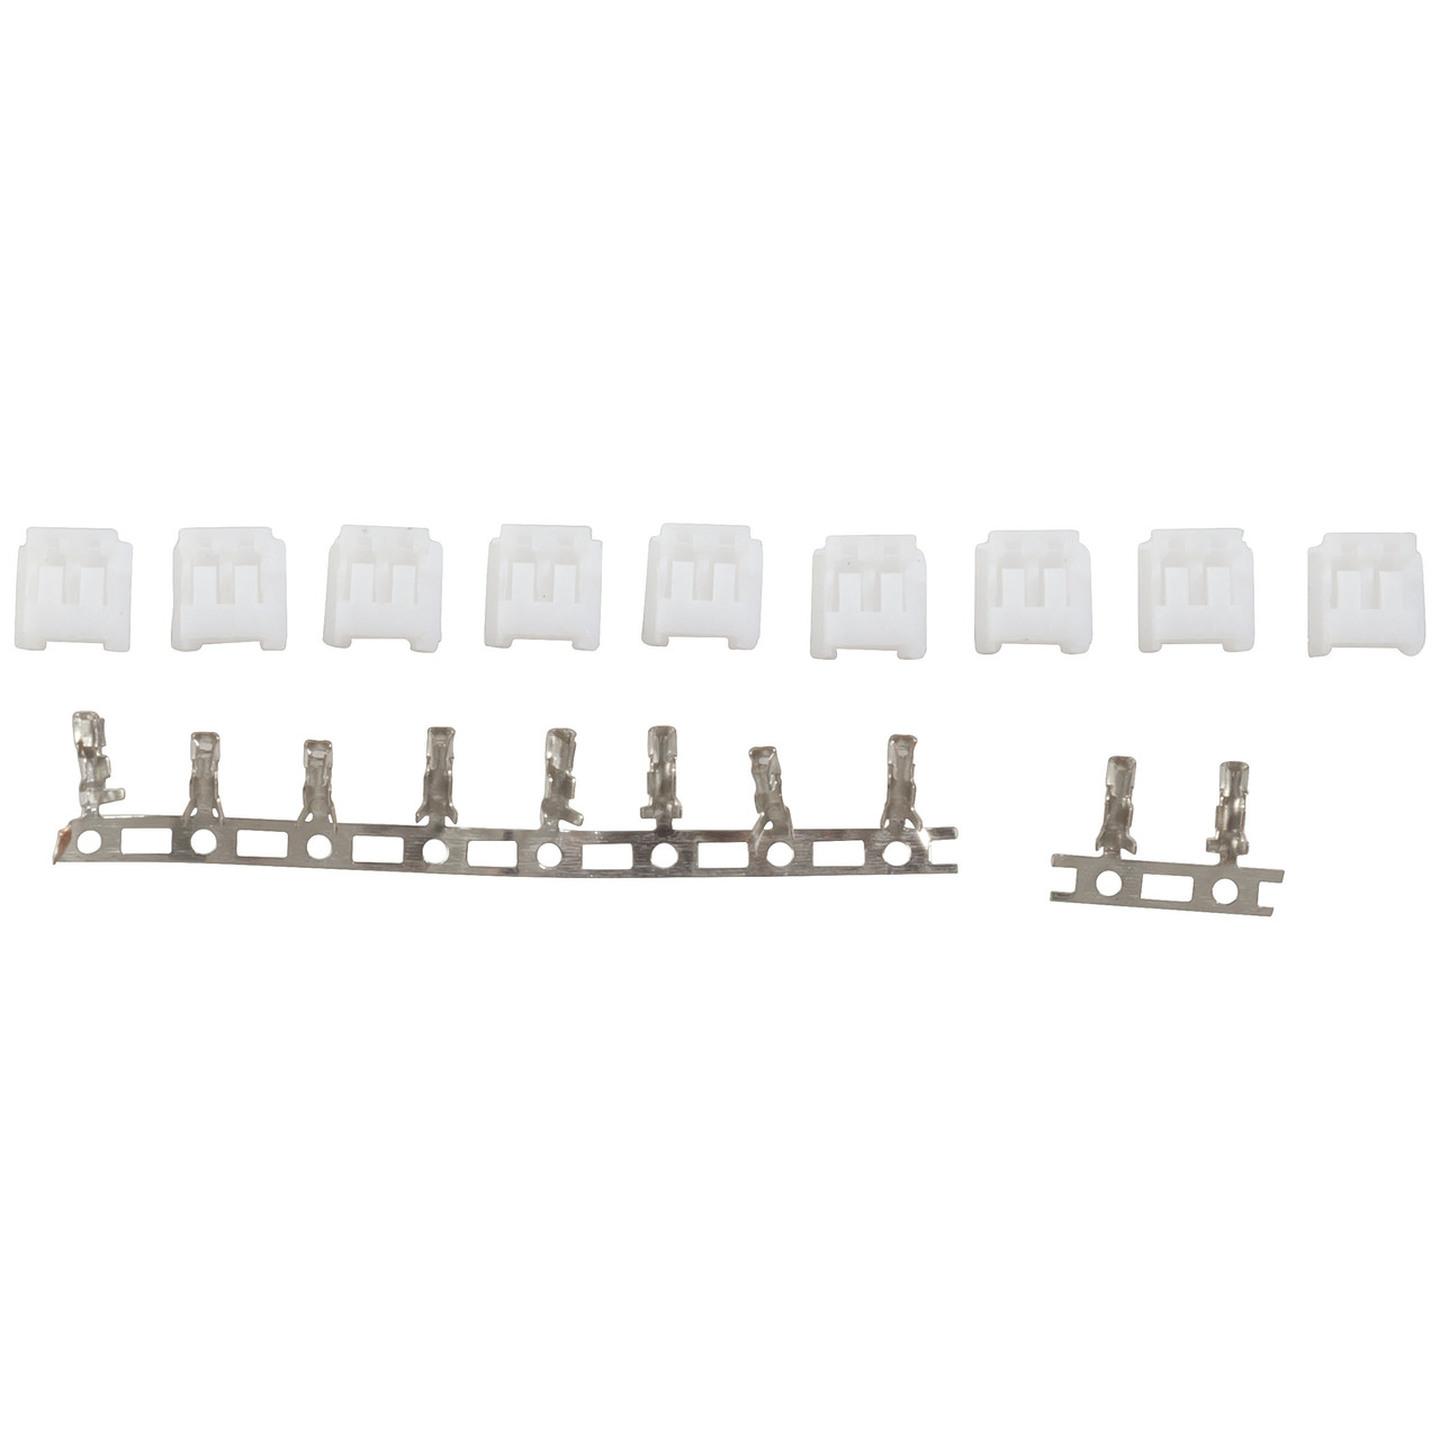 0.1 2.54mm 2-Pin Crimp Connector - 10-Pack